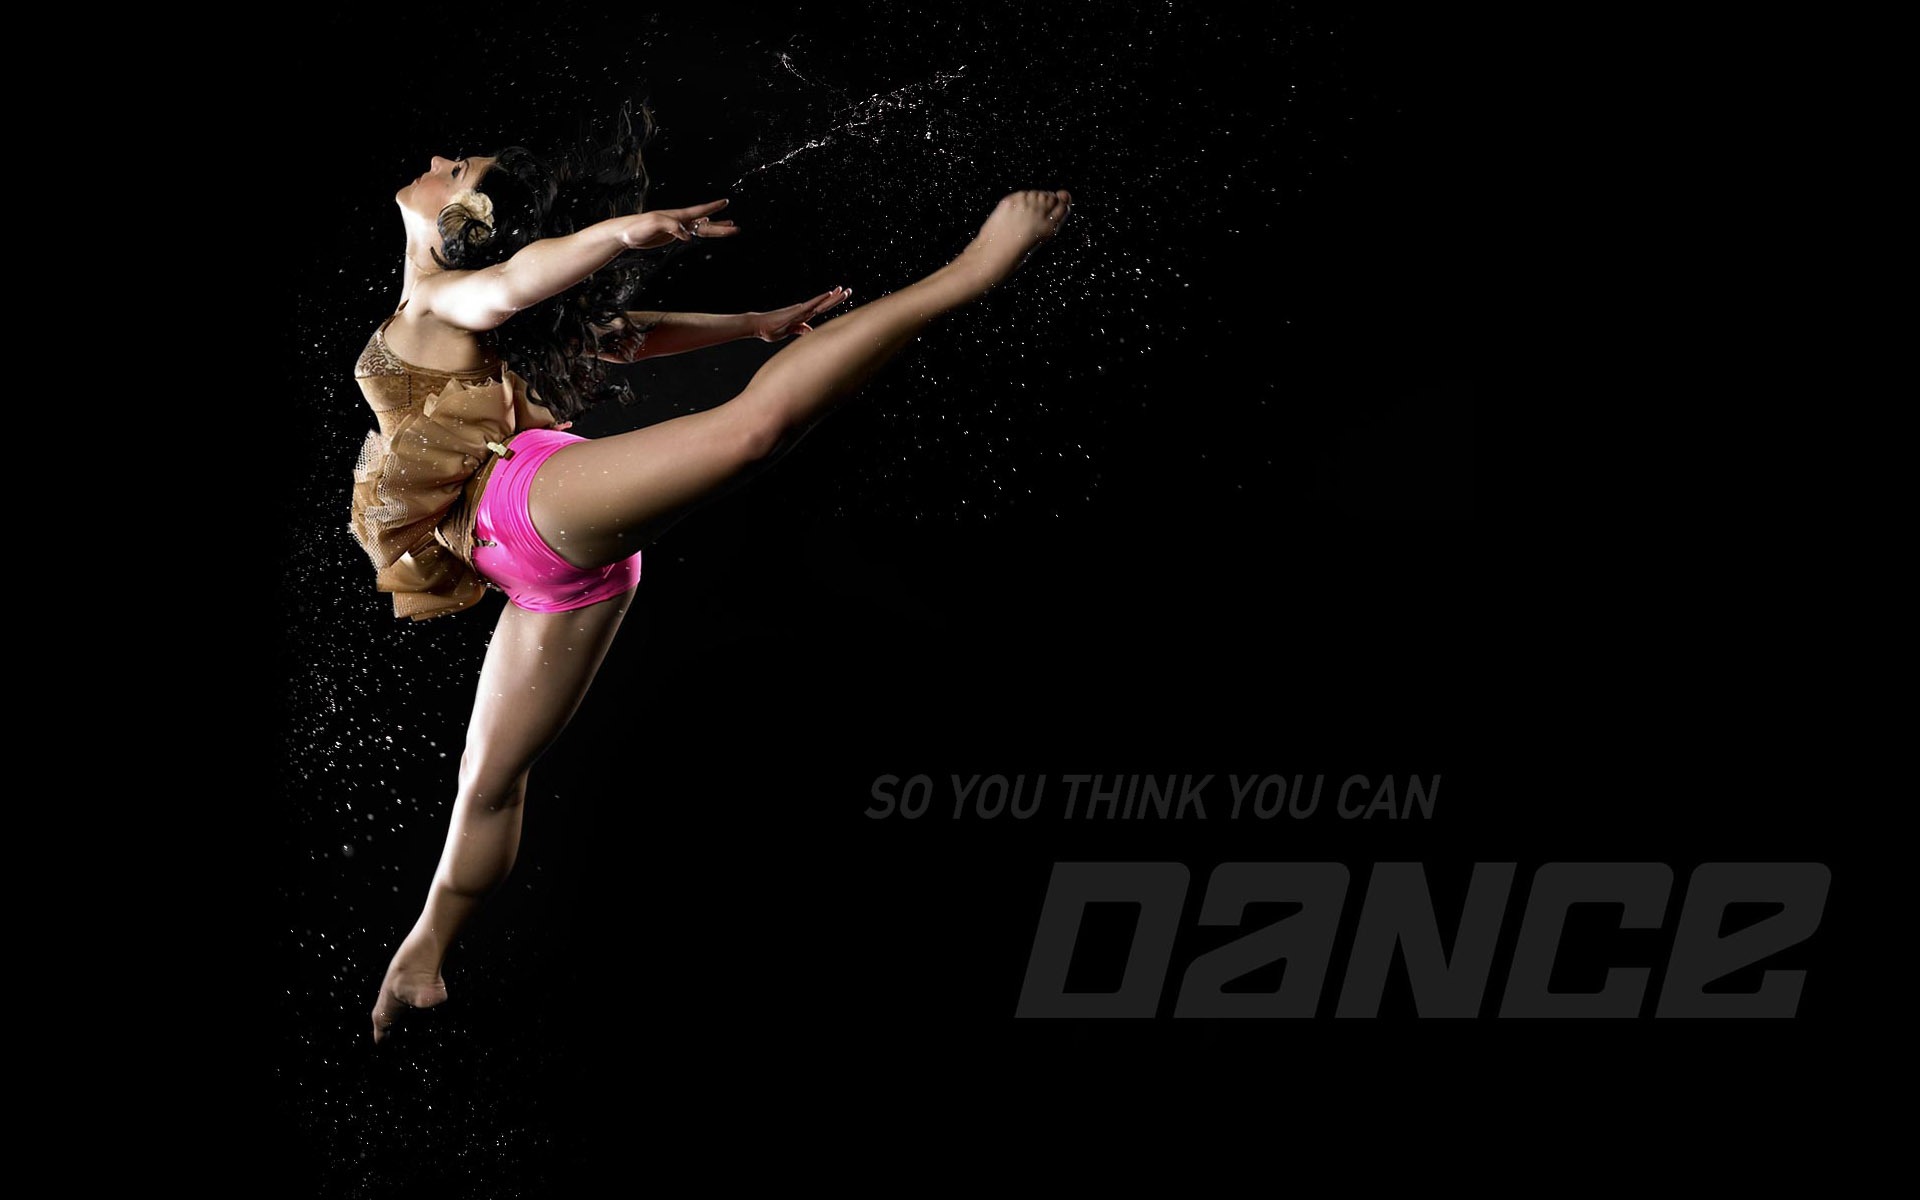 So You Think You Can Dance 舞林争霸 壁纸(一)17 - 1920x1200